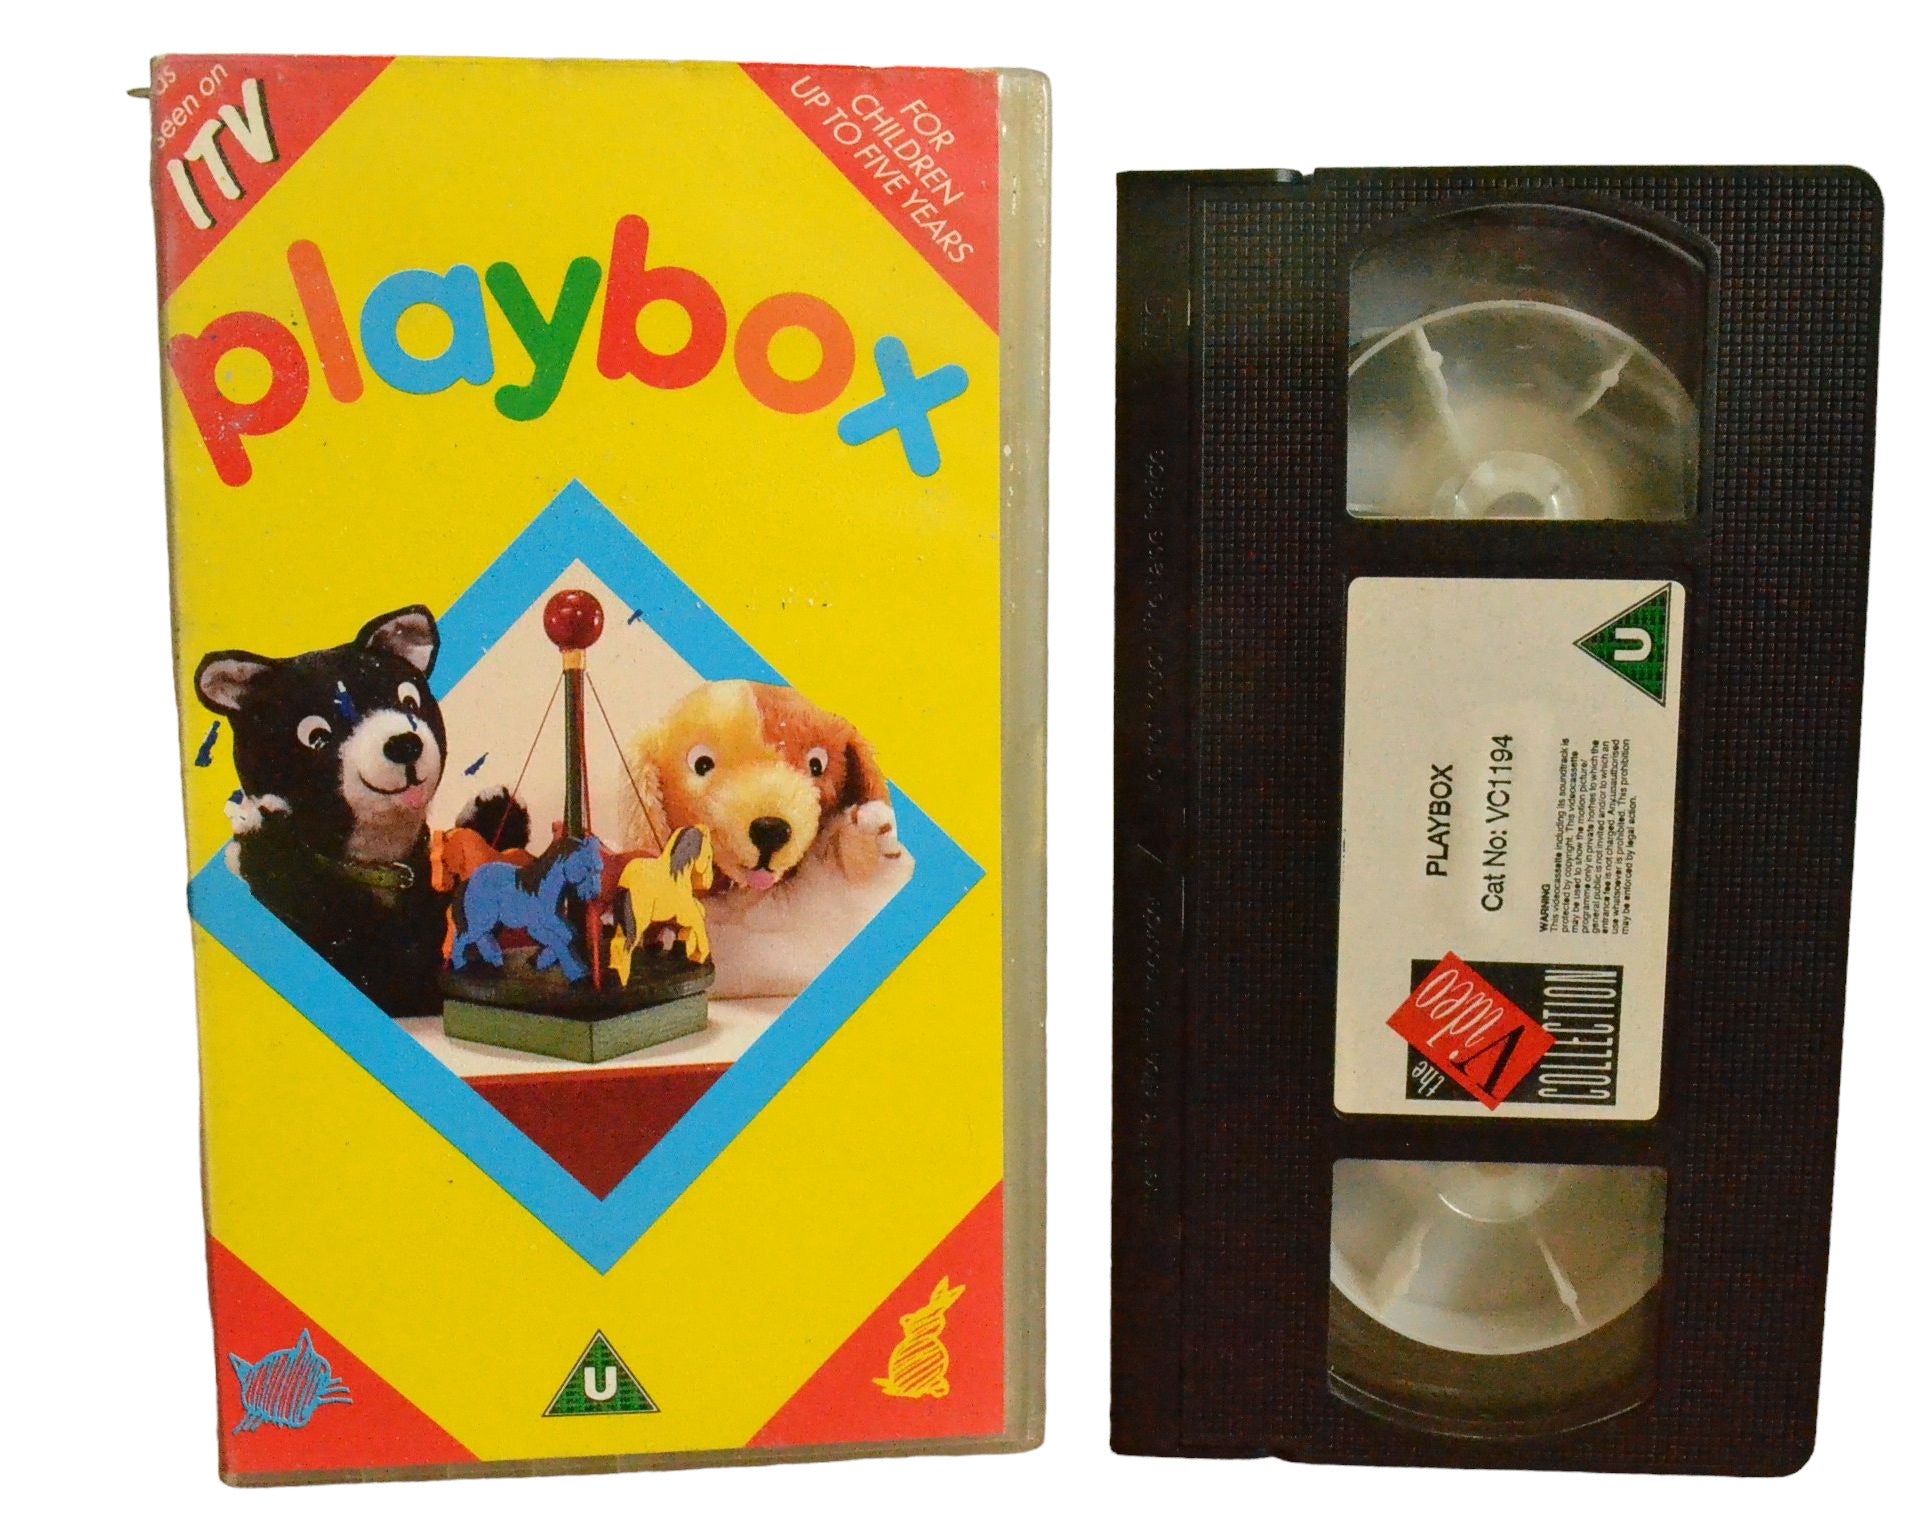 Playbox (Featuring Voice of Pat Coombs and Keith Chegwin) - Eamonn Andrews - The Video Collection - Children - Pal - VHS-